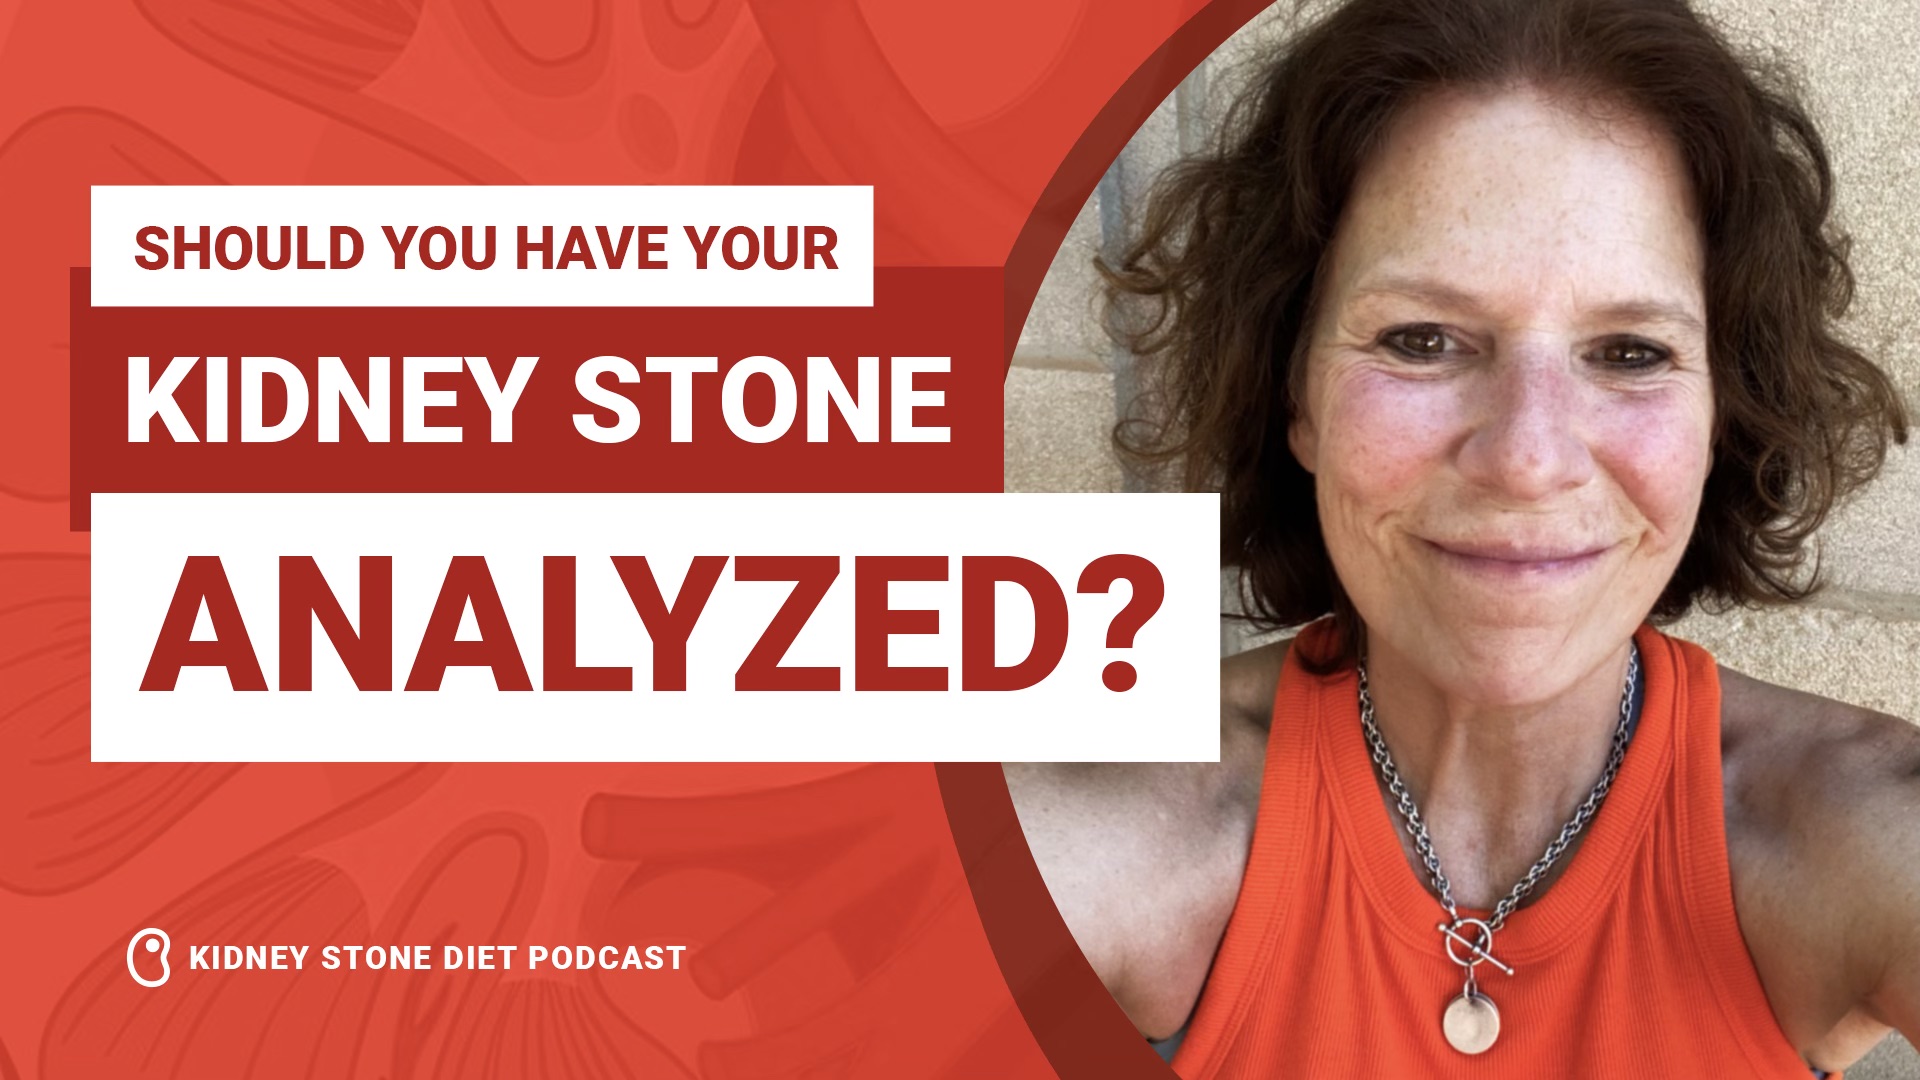 Should you have your kidney stone analyzed?